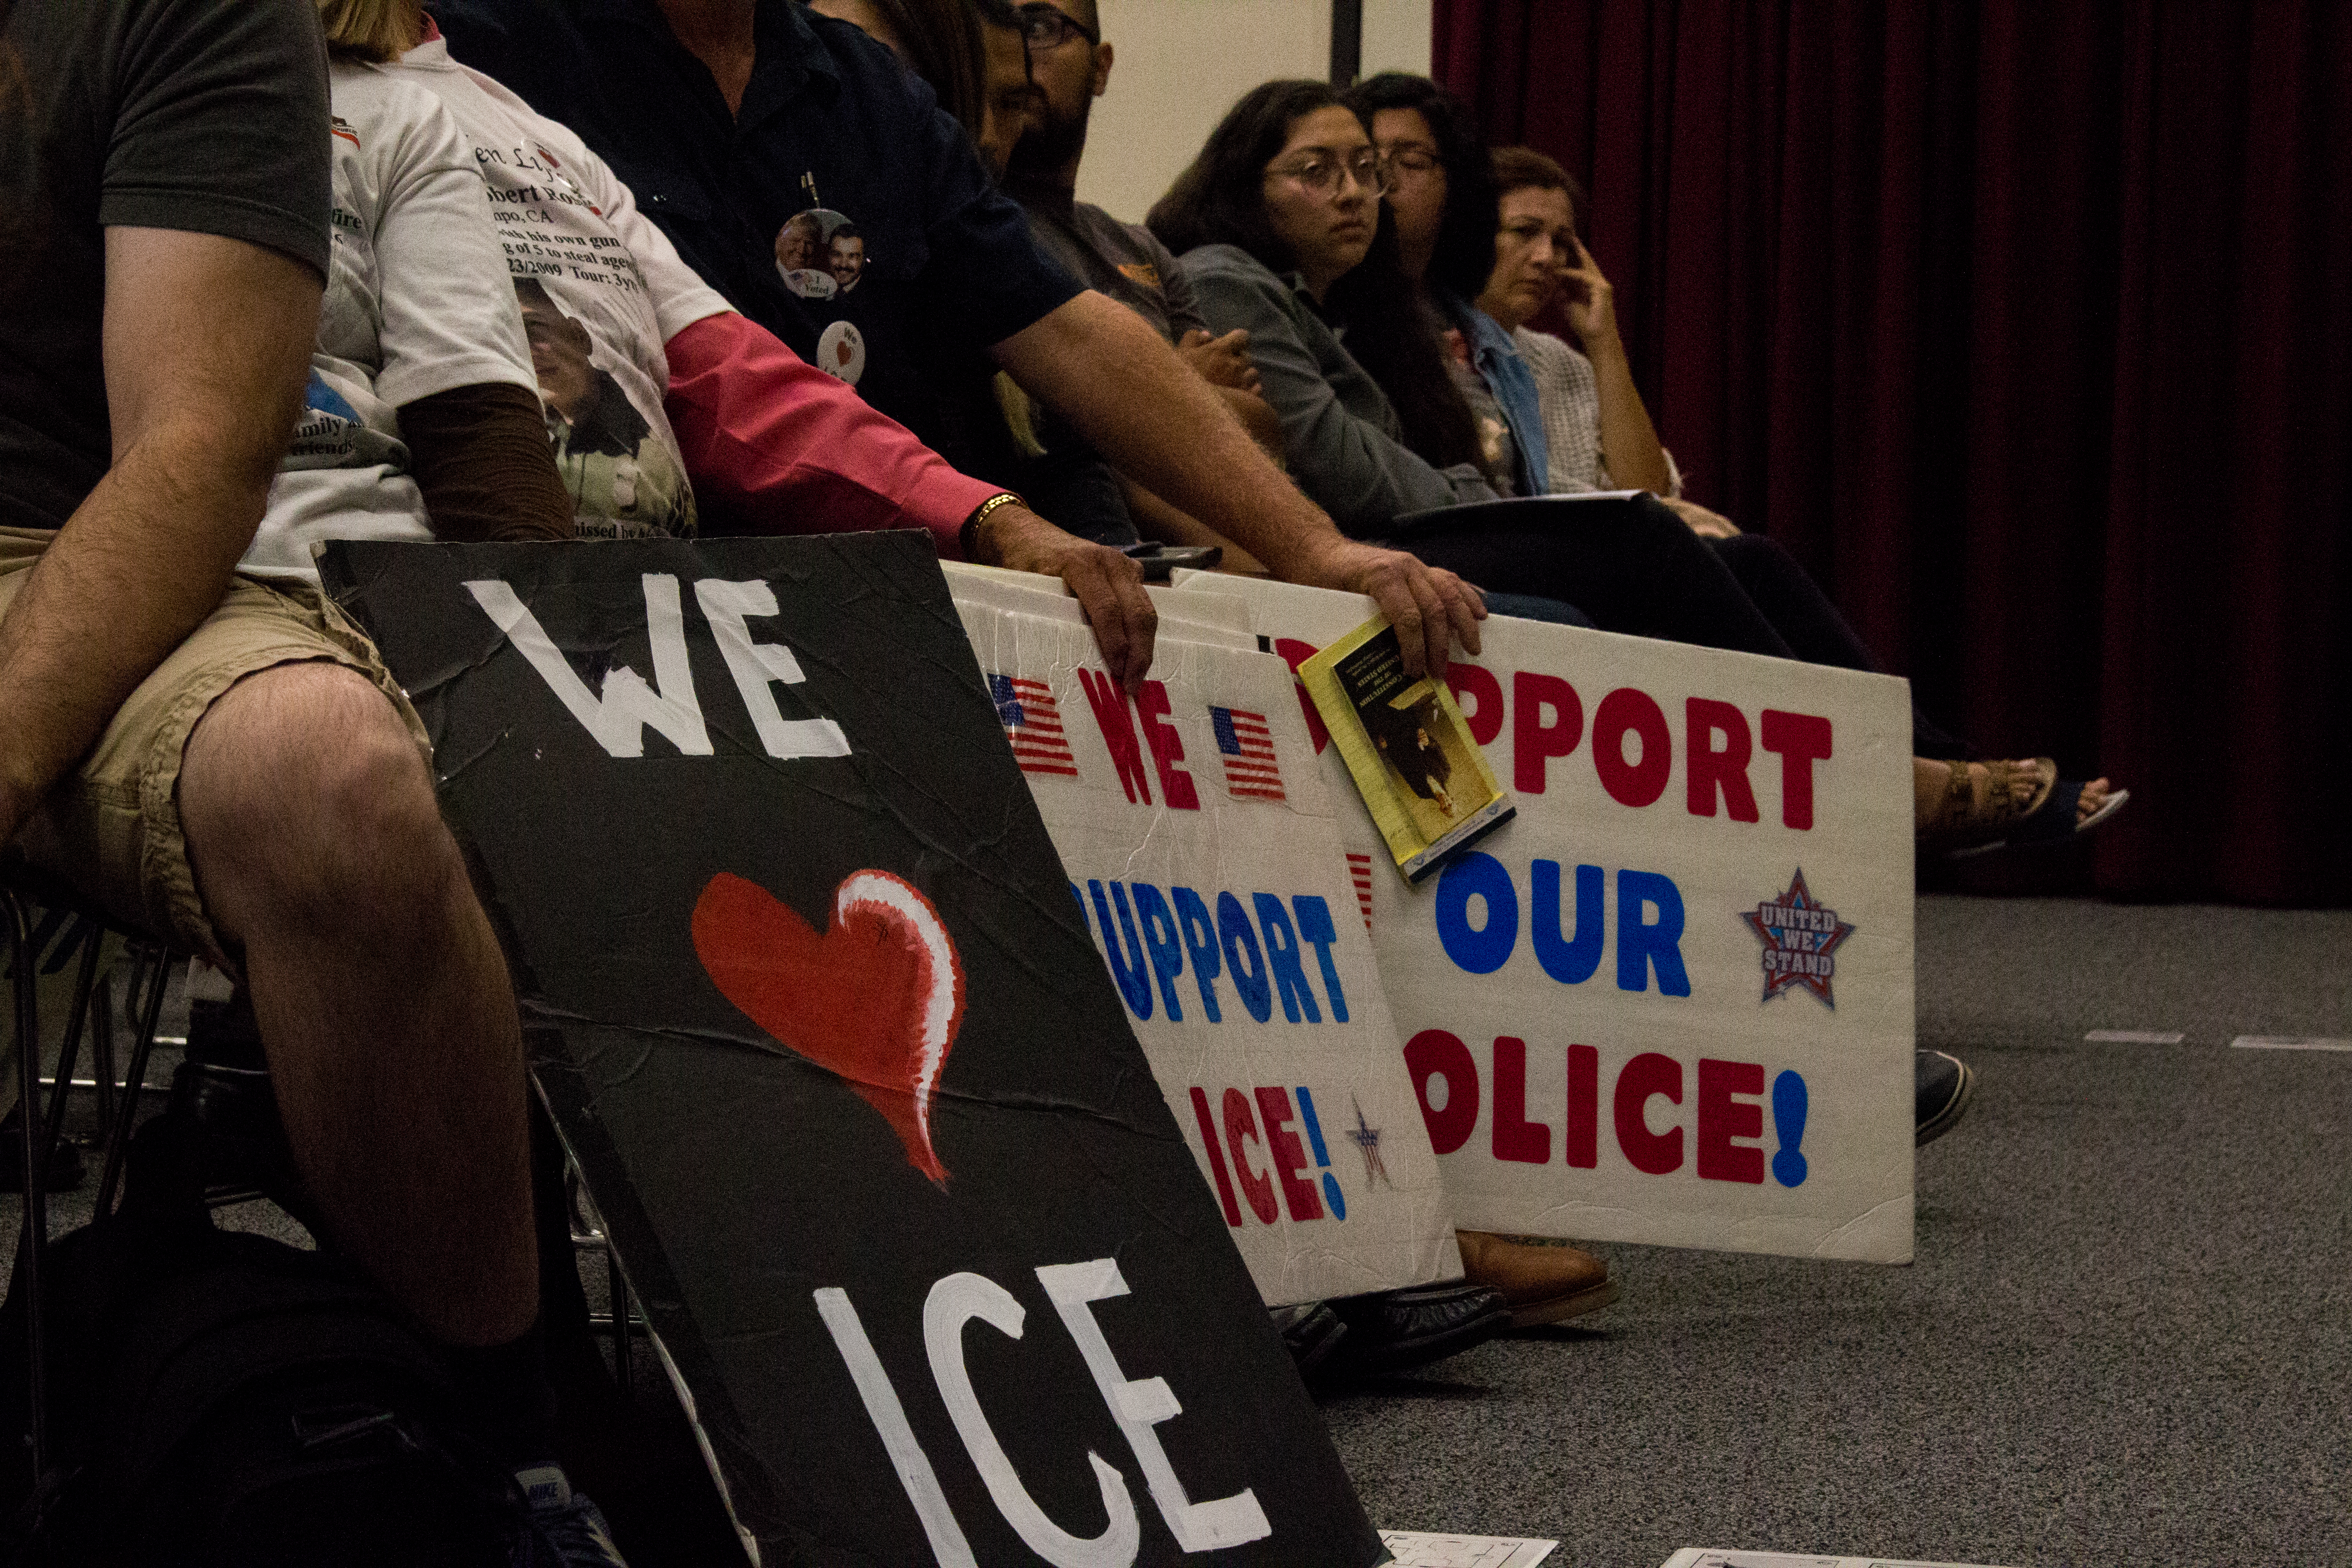 Glendora town hall erupts over state immigration law